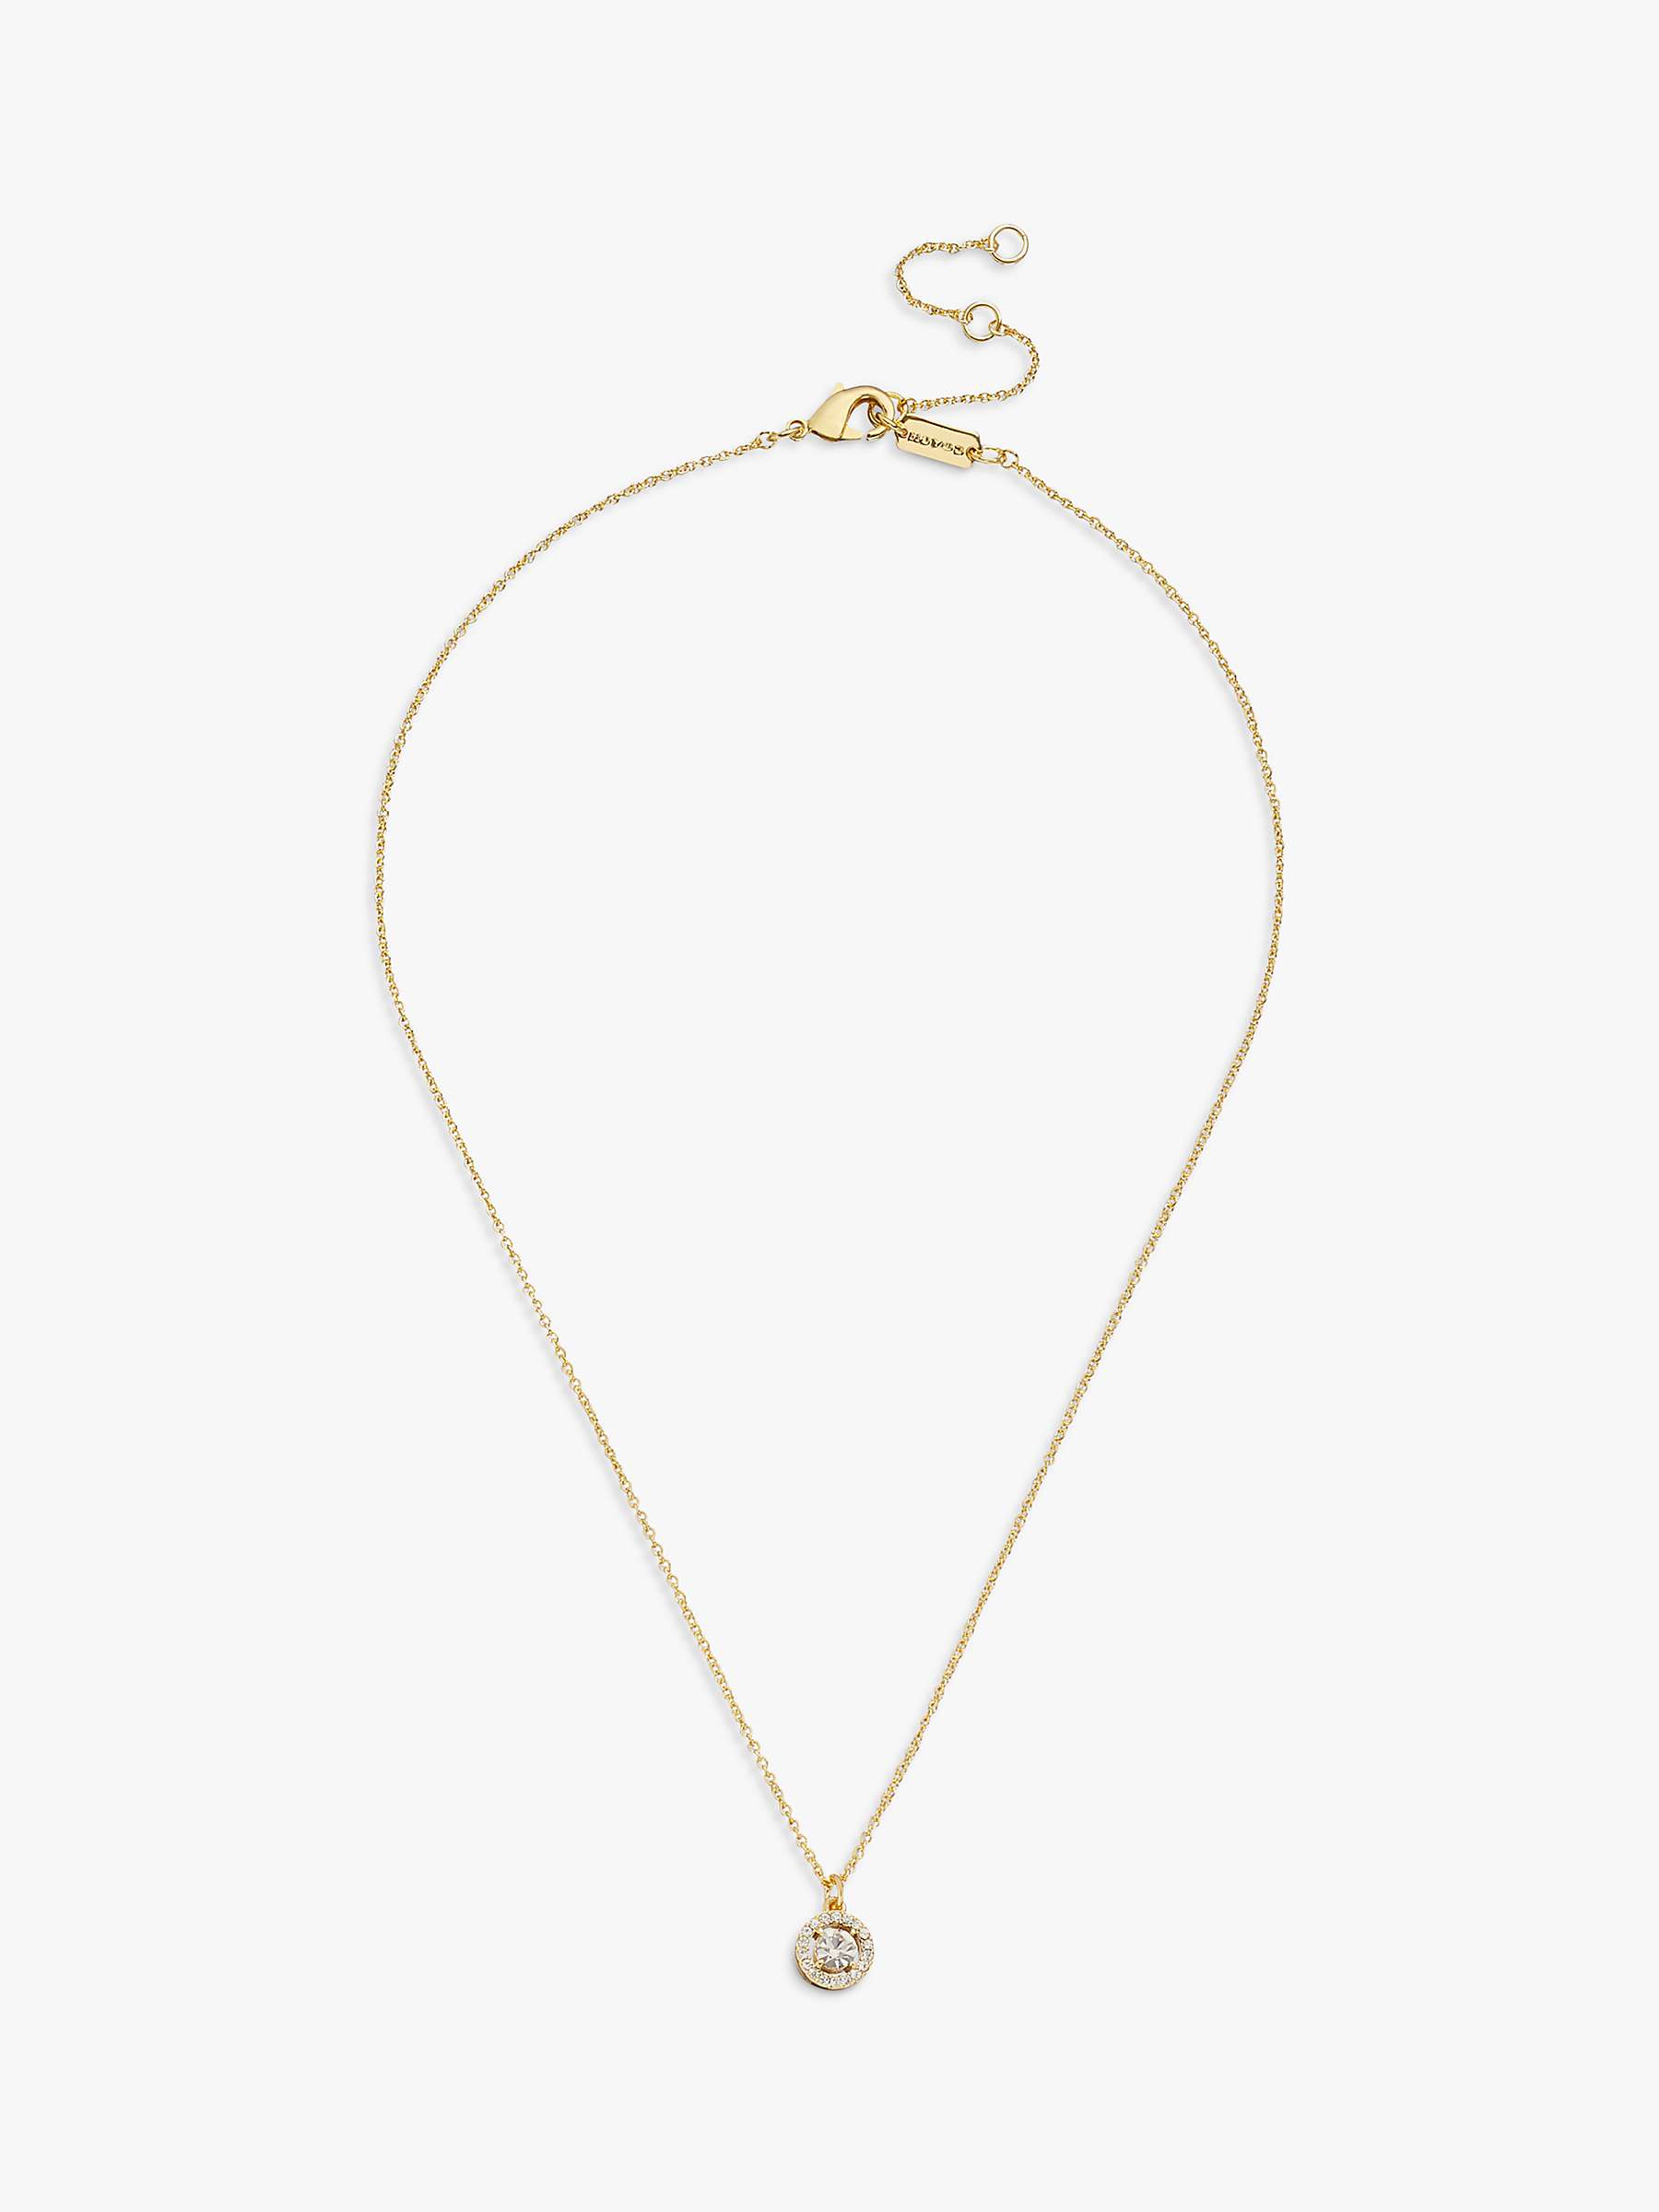 Coach Crystal Halo Pave Pendant Necklace, Gold at John Lewis & Partners